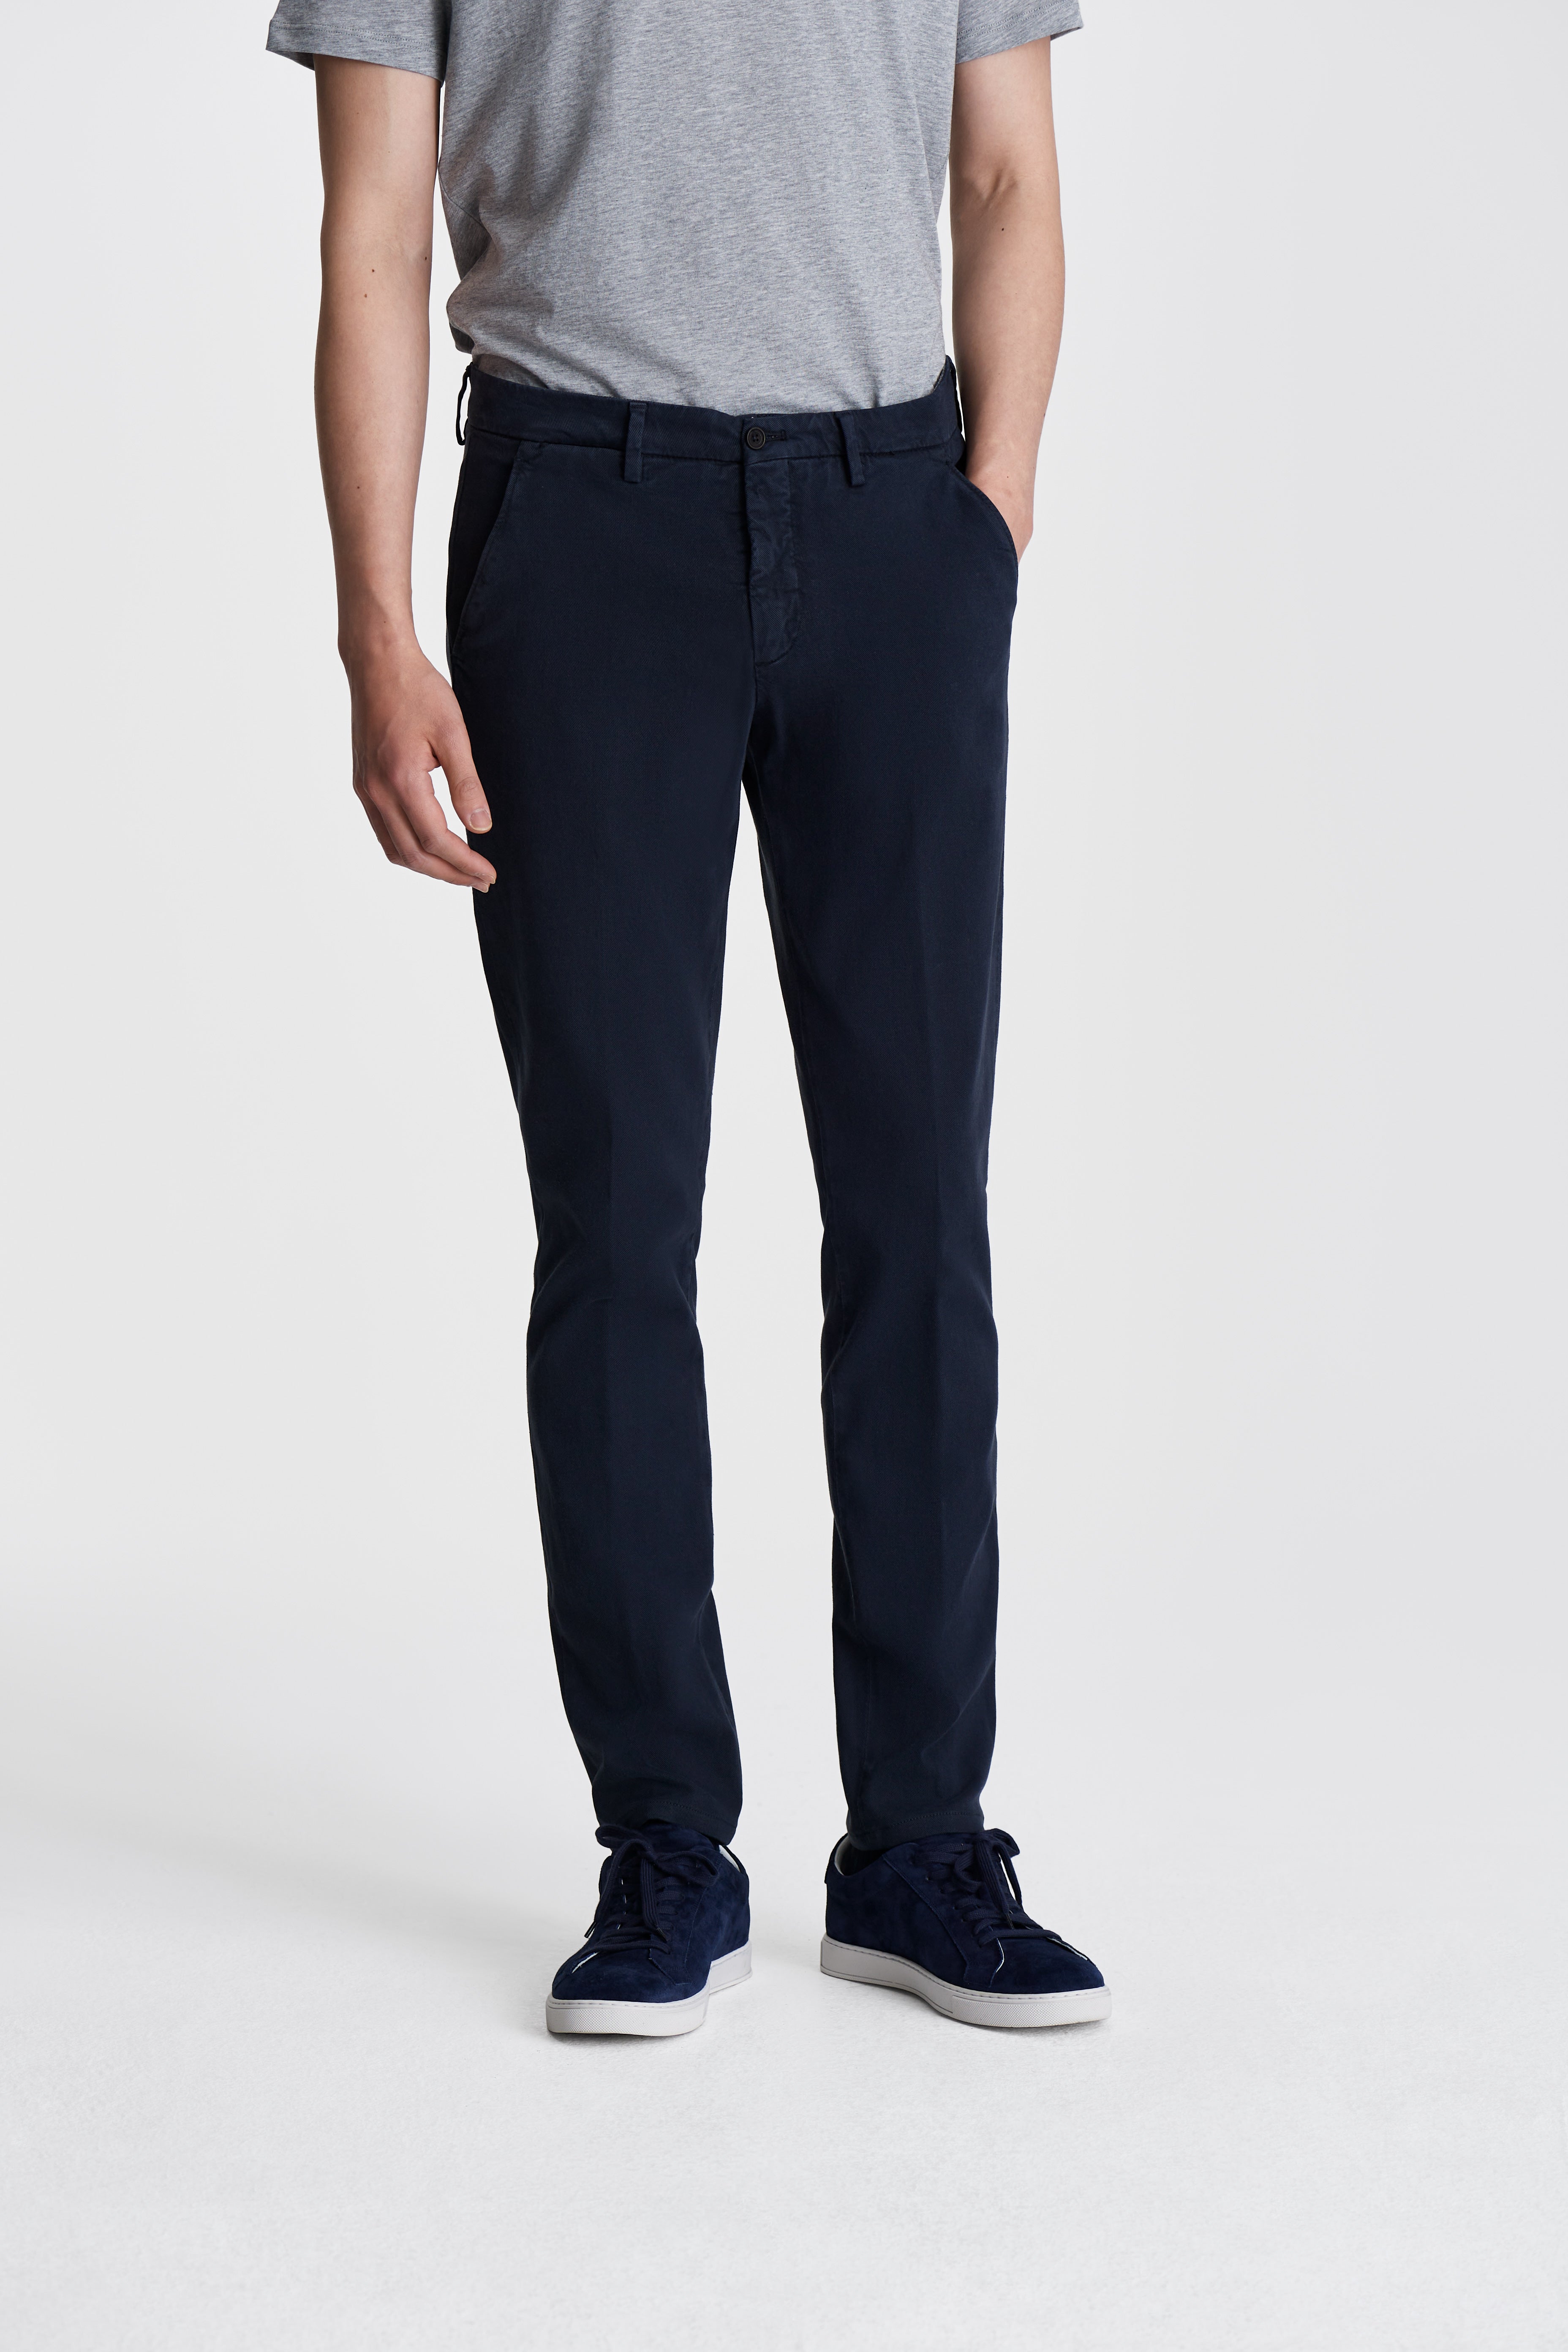 Cotton Flat Front Slim Fit Chinos Navy Model Cropped Image